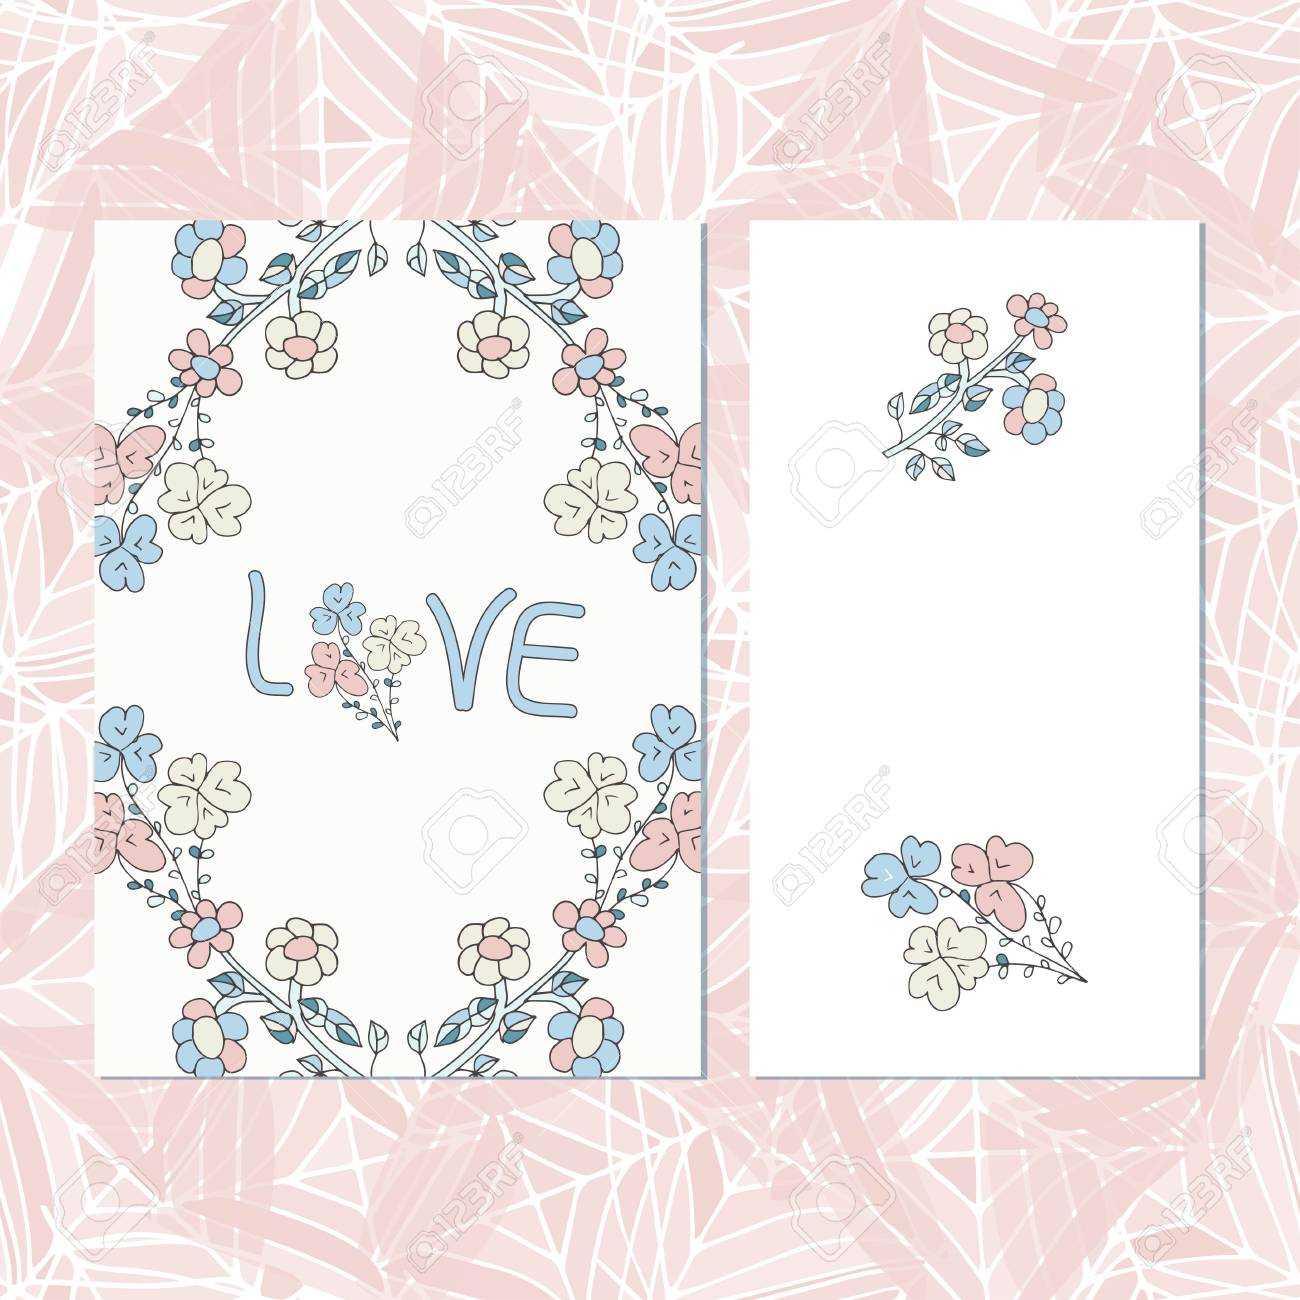 The Template For The Wedding. Invitation, Anniversary Card, Valentine's.. With Template For Anniversary Card